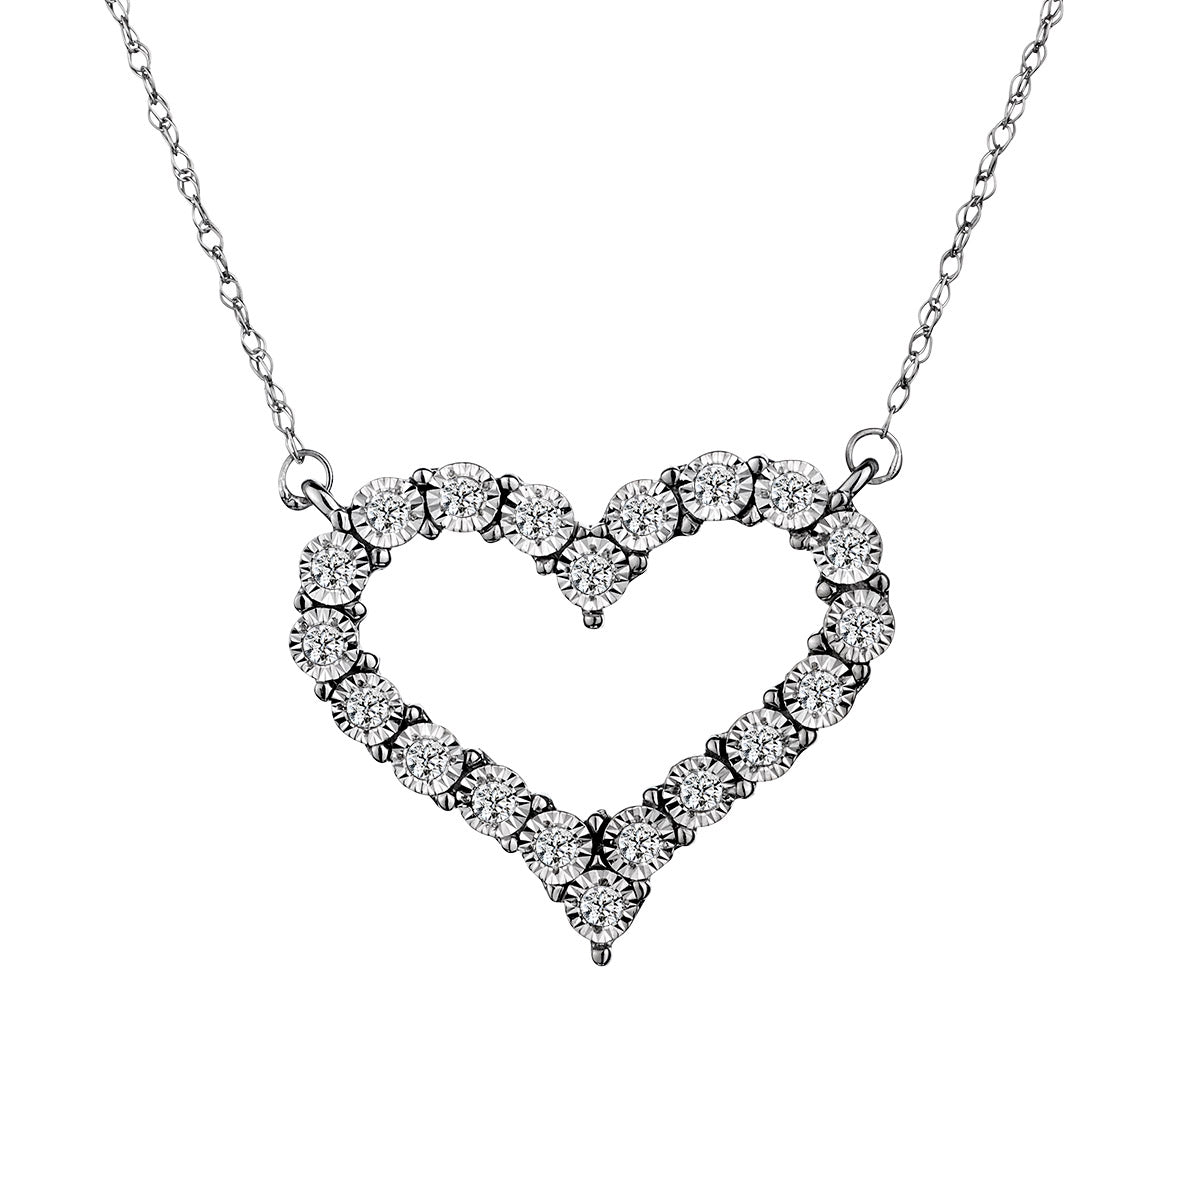 .16 Carat of Diamonds Heart Pendant,  10kt White Gold. Necklaces and Pendants. Griffin Jewellery Designs.